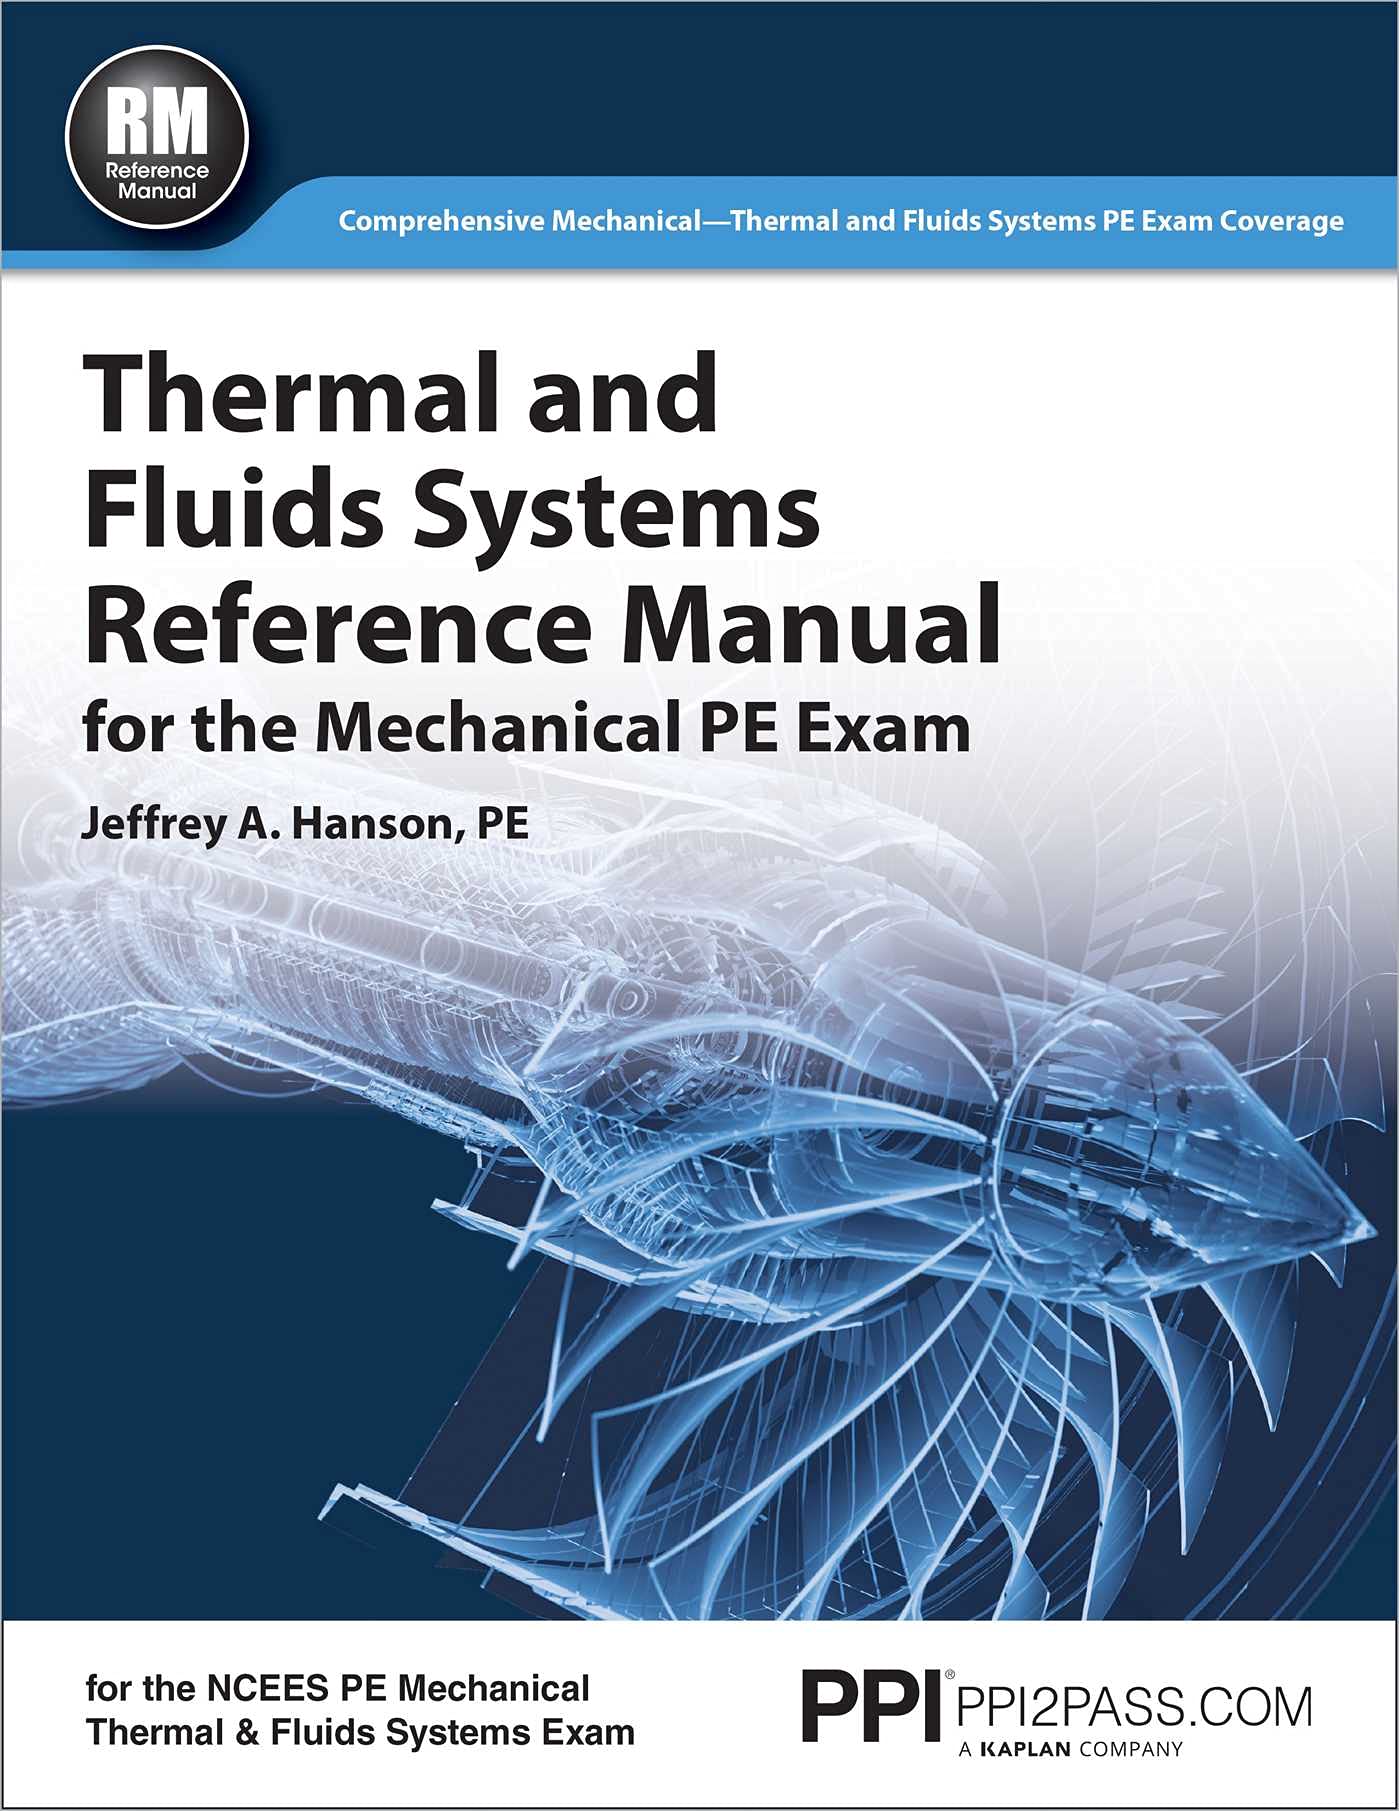 PPI Thermal and Fluids Systems Reference Manual for the Mechanical PE Exam – A Complete Reference Manual for the NCEES PE Mechanical Thermal and Fl...